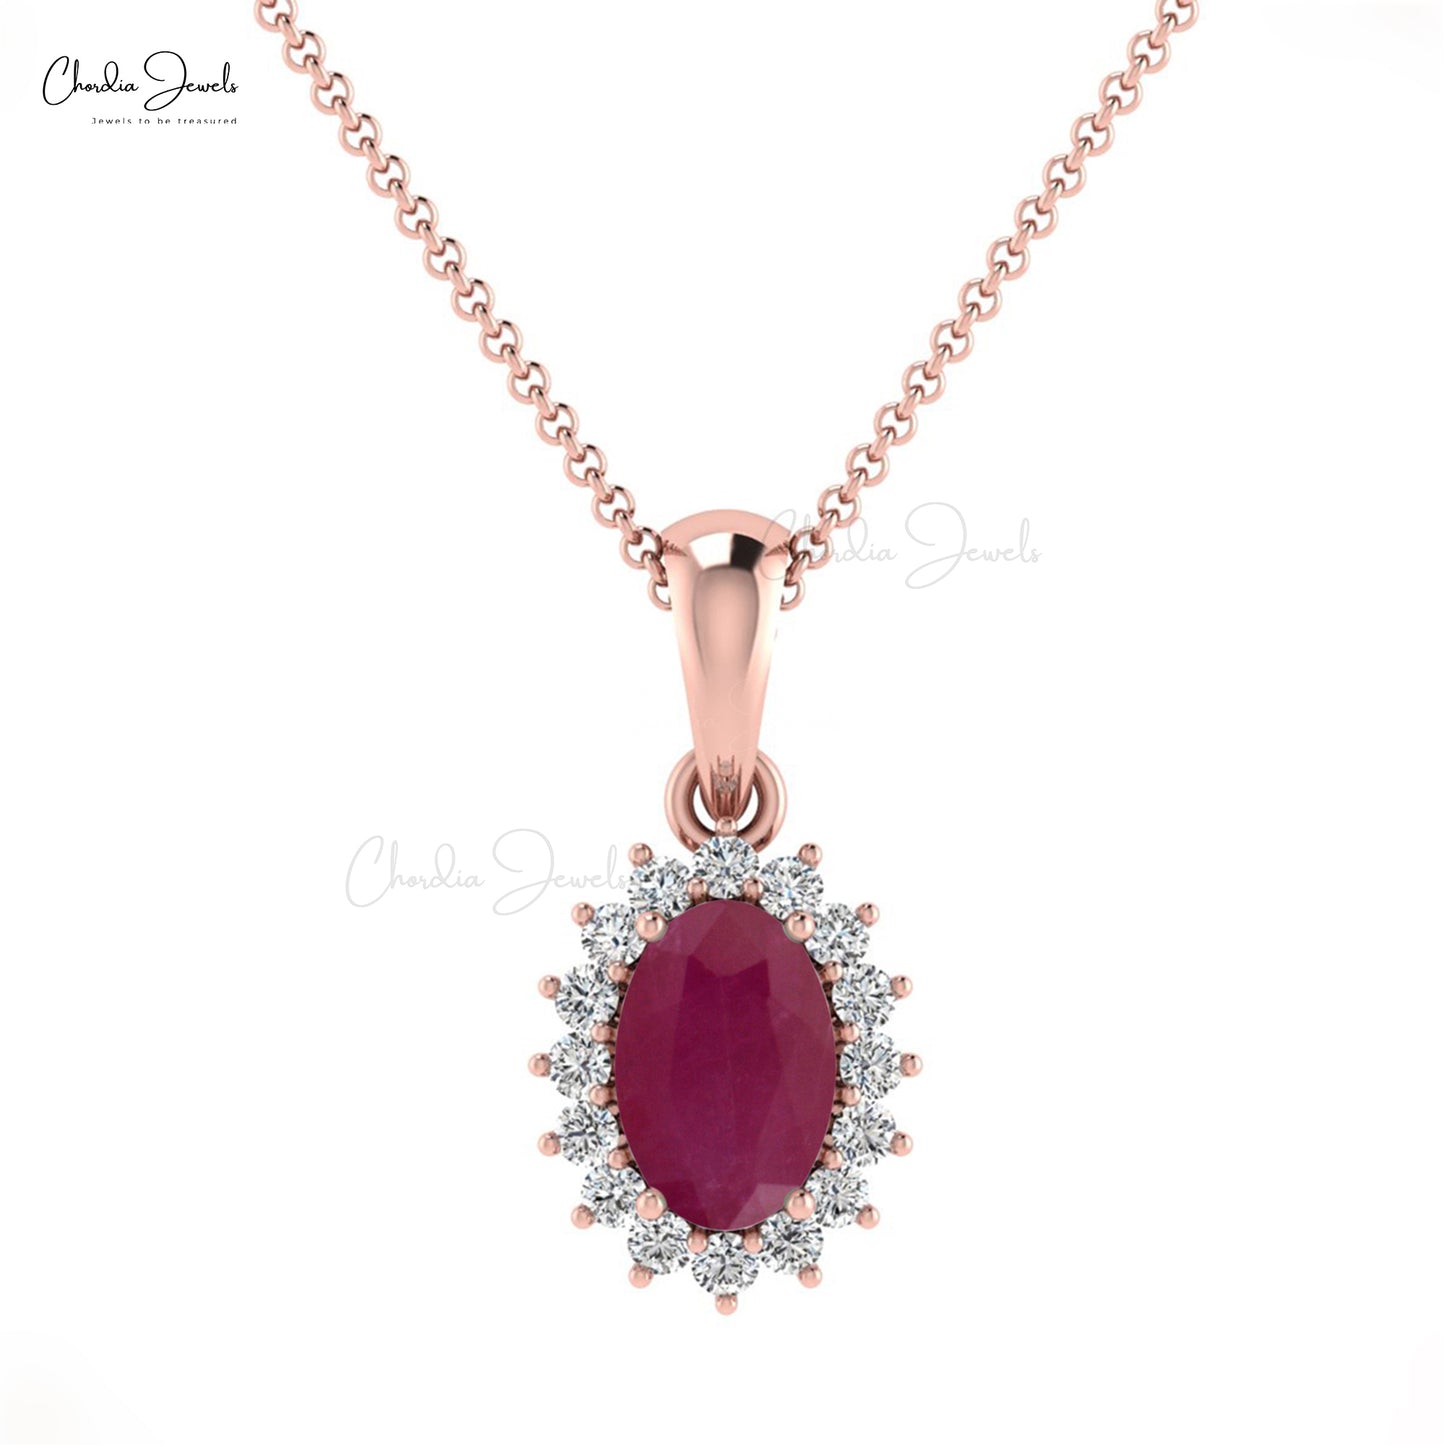 Unique 6x4mm Oval Shaped Red Ruby Pendant With Diamond Halo